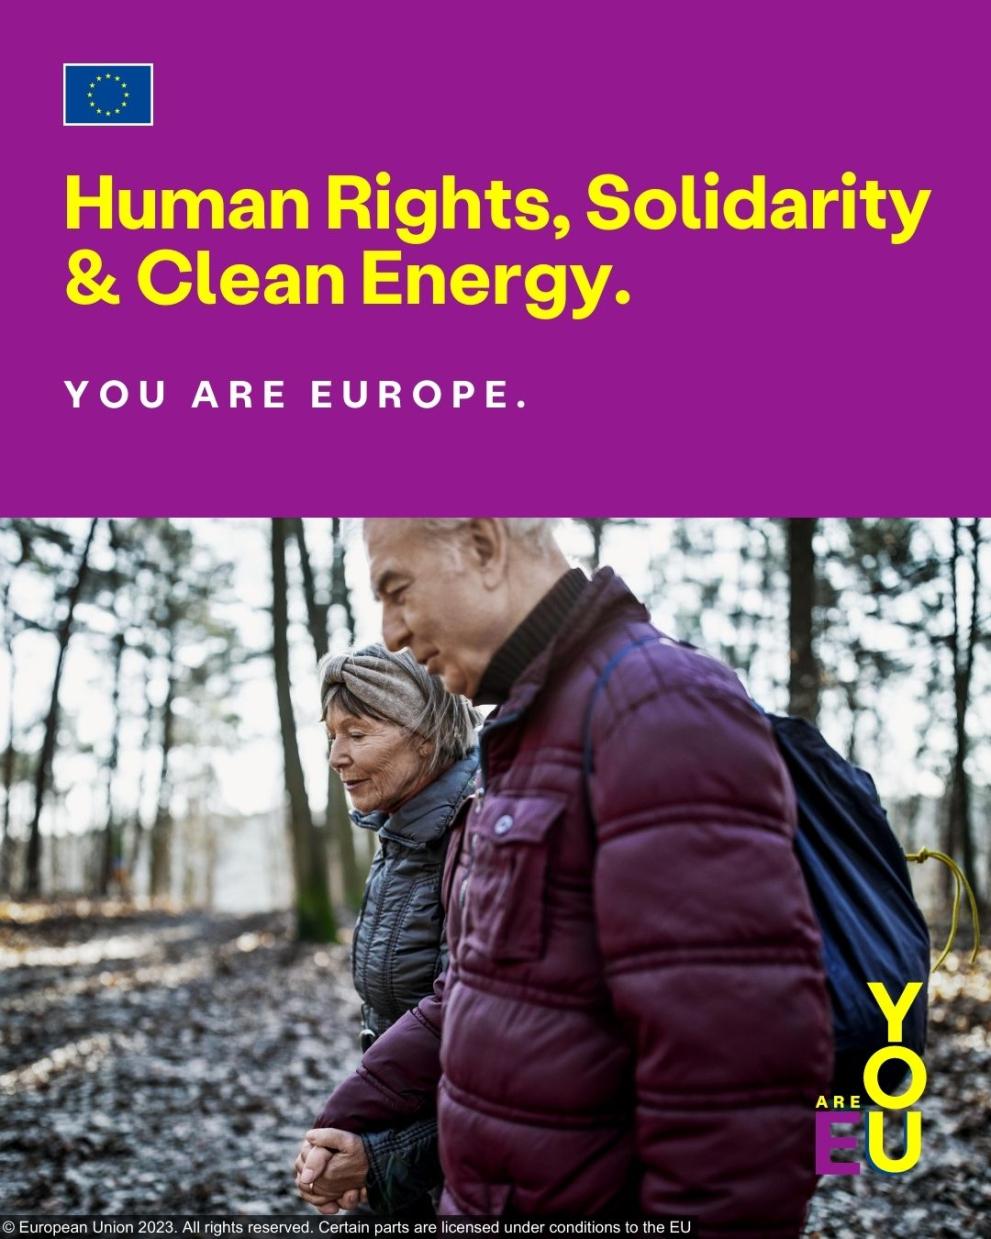 Human Rights, Solidarity and Clean Energy.